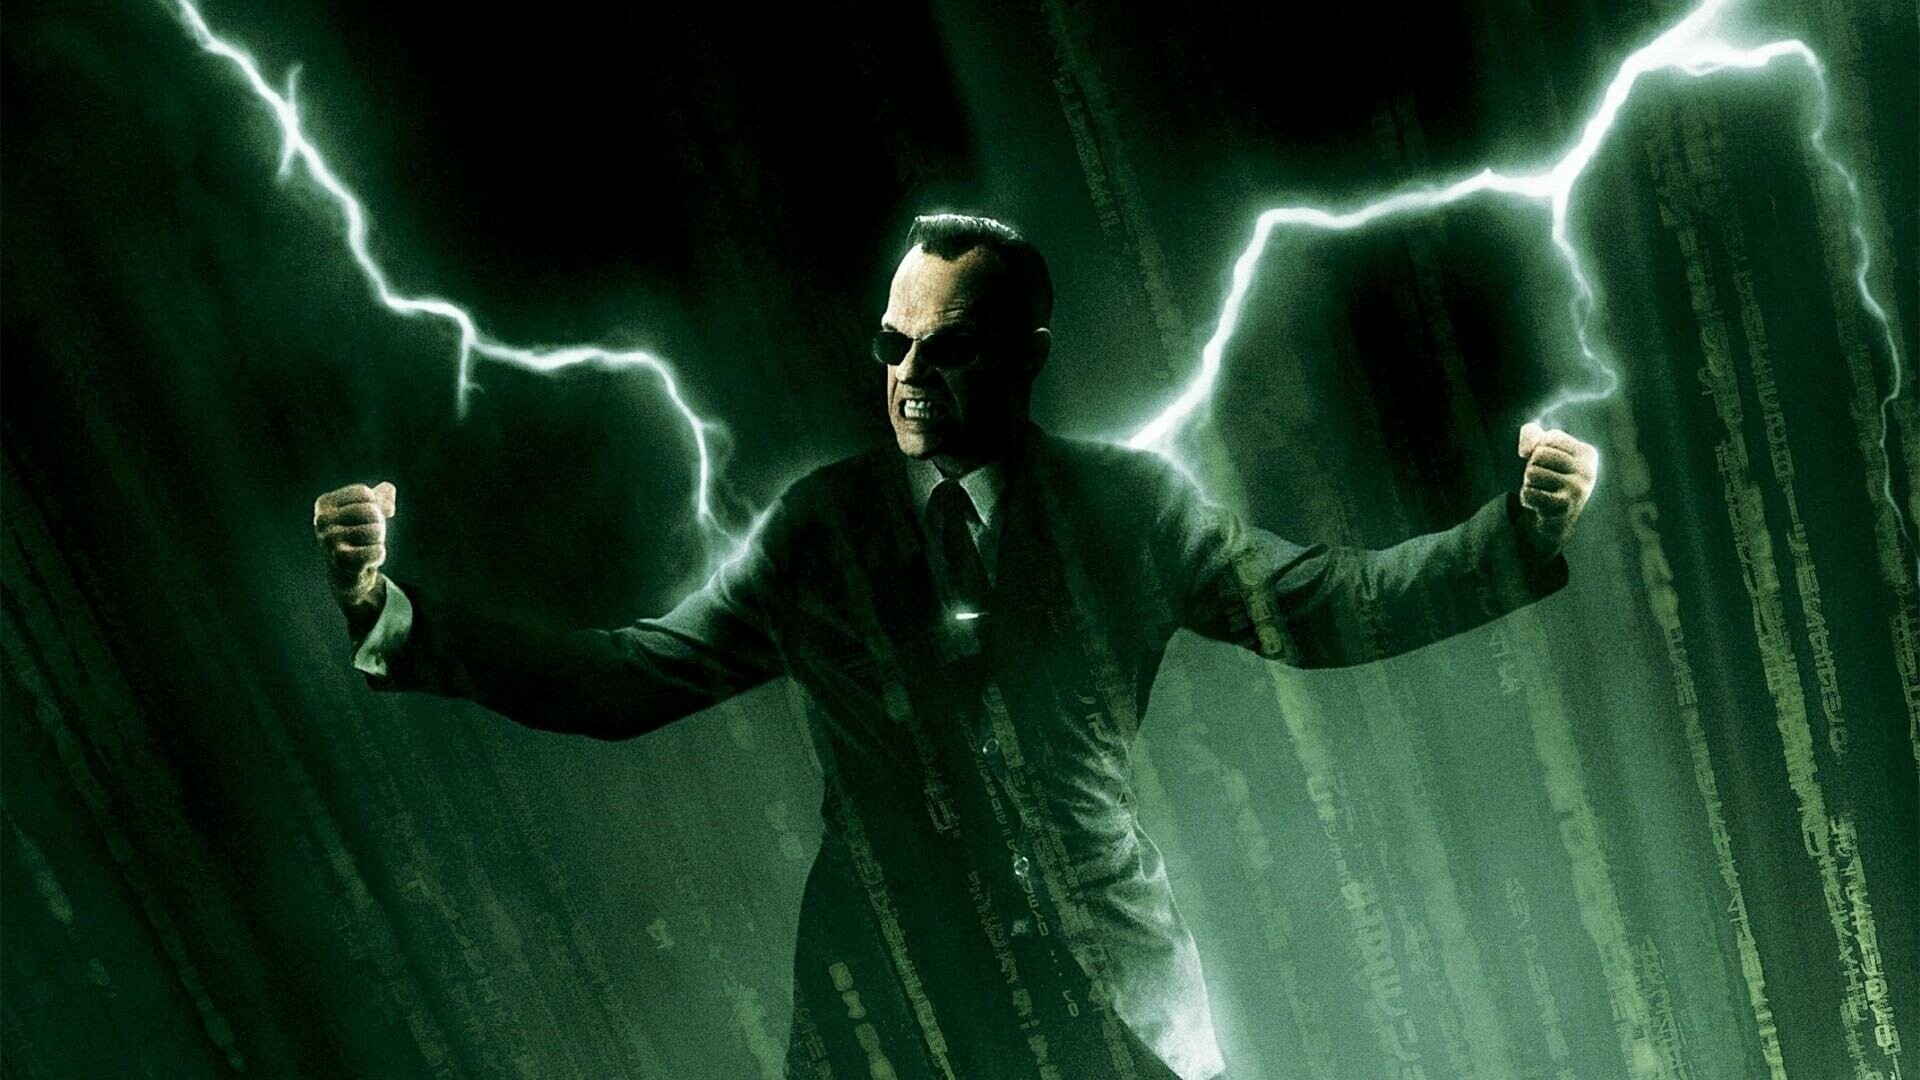 Matrix Franchise: Sci-fi thriller that reveals the human imagination as a saving force in the universe. 1920x1080 Full HD Background.